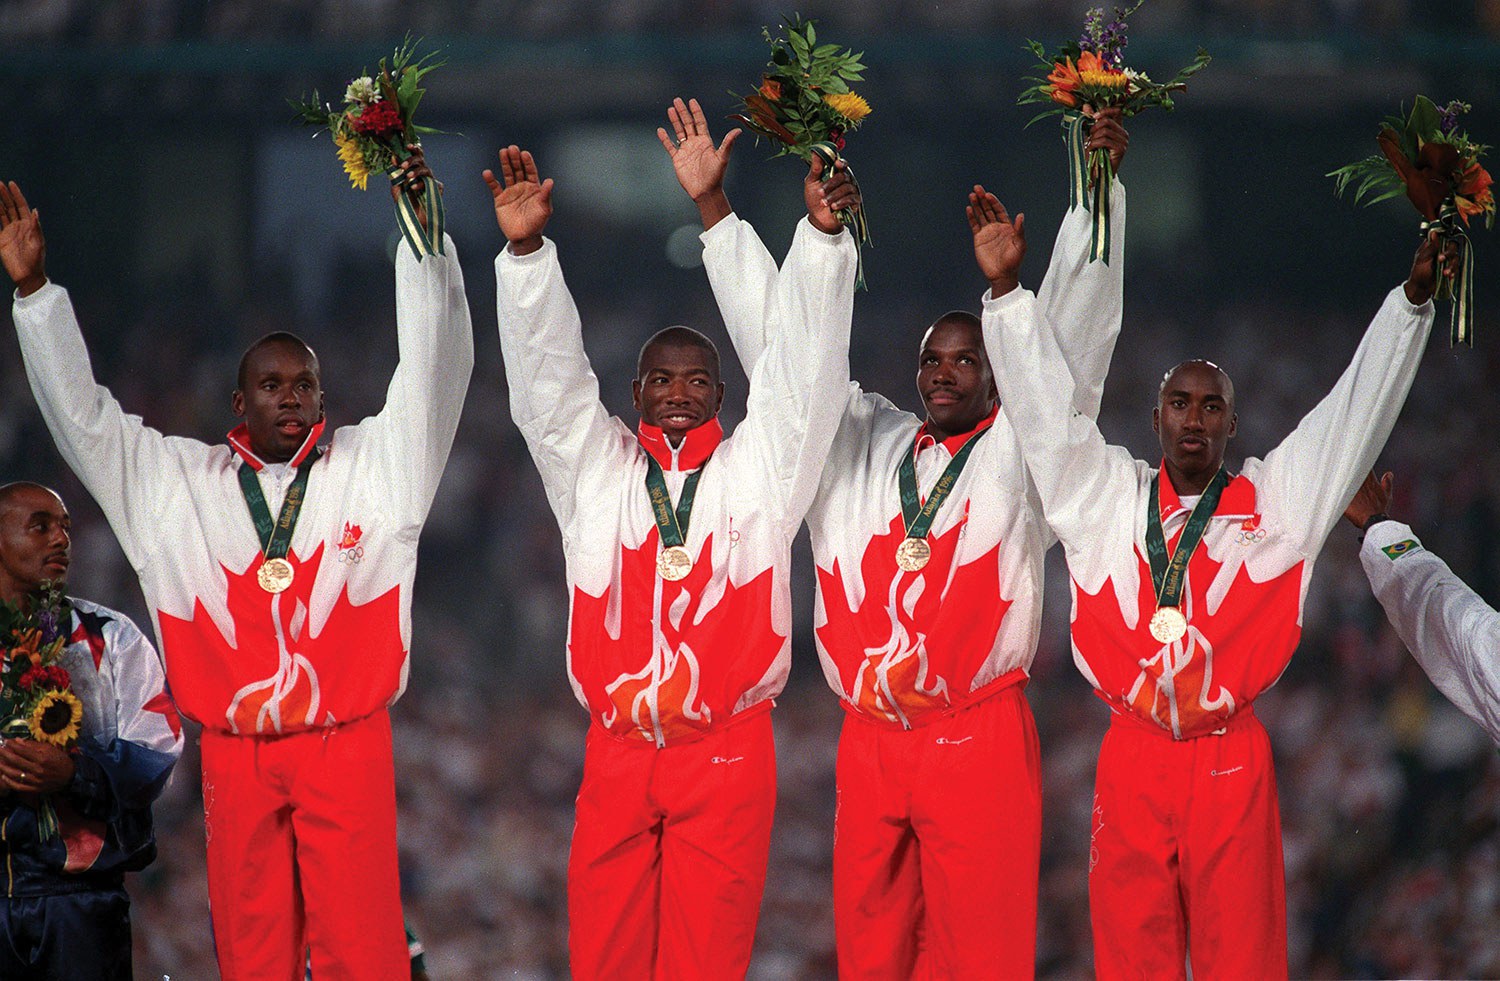 Men’s 4 x 100-metre relay gold medal ceremony, 1996 (Bruny Surin, Glenroy Gilbert, Donovan Bailey and Robert Esmie). Photo courtesy of the Canadian Olympic Committee